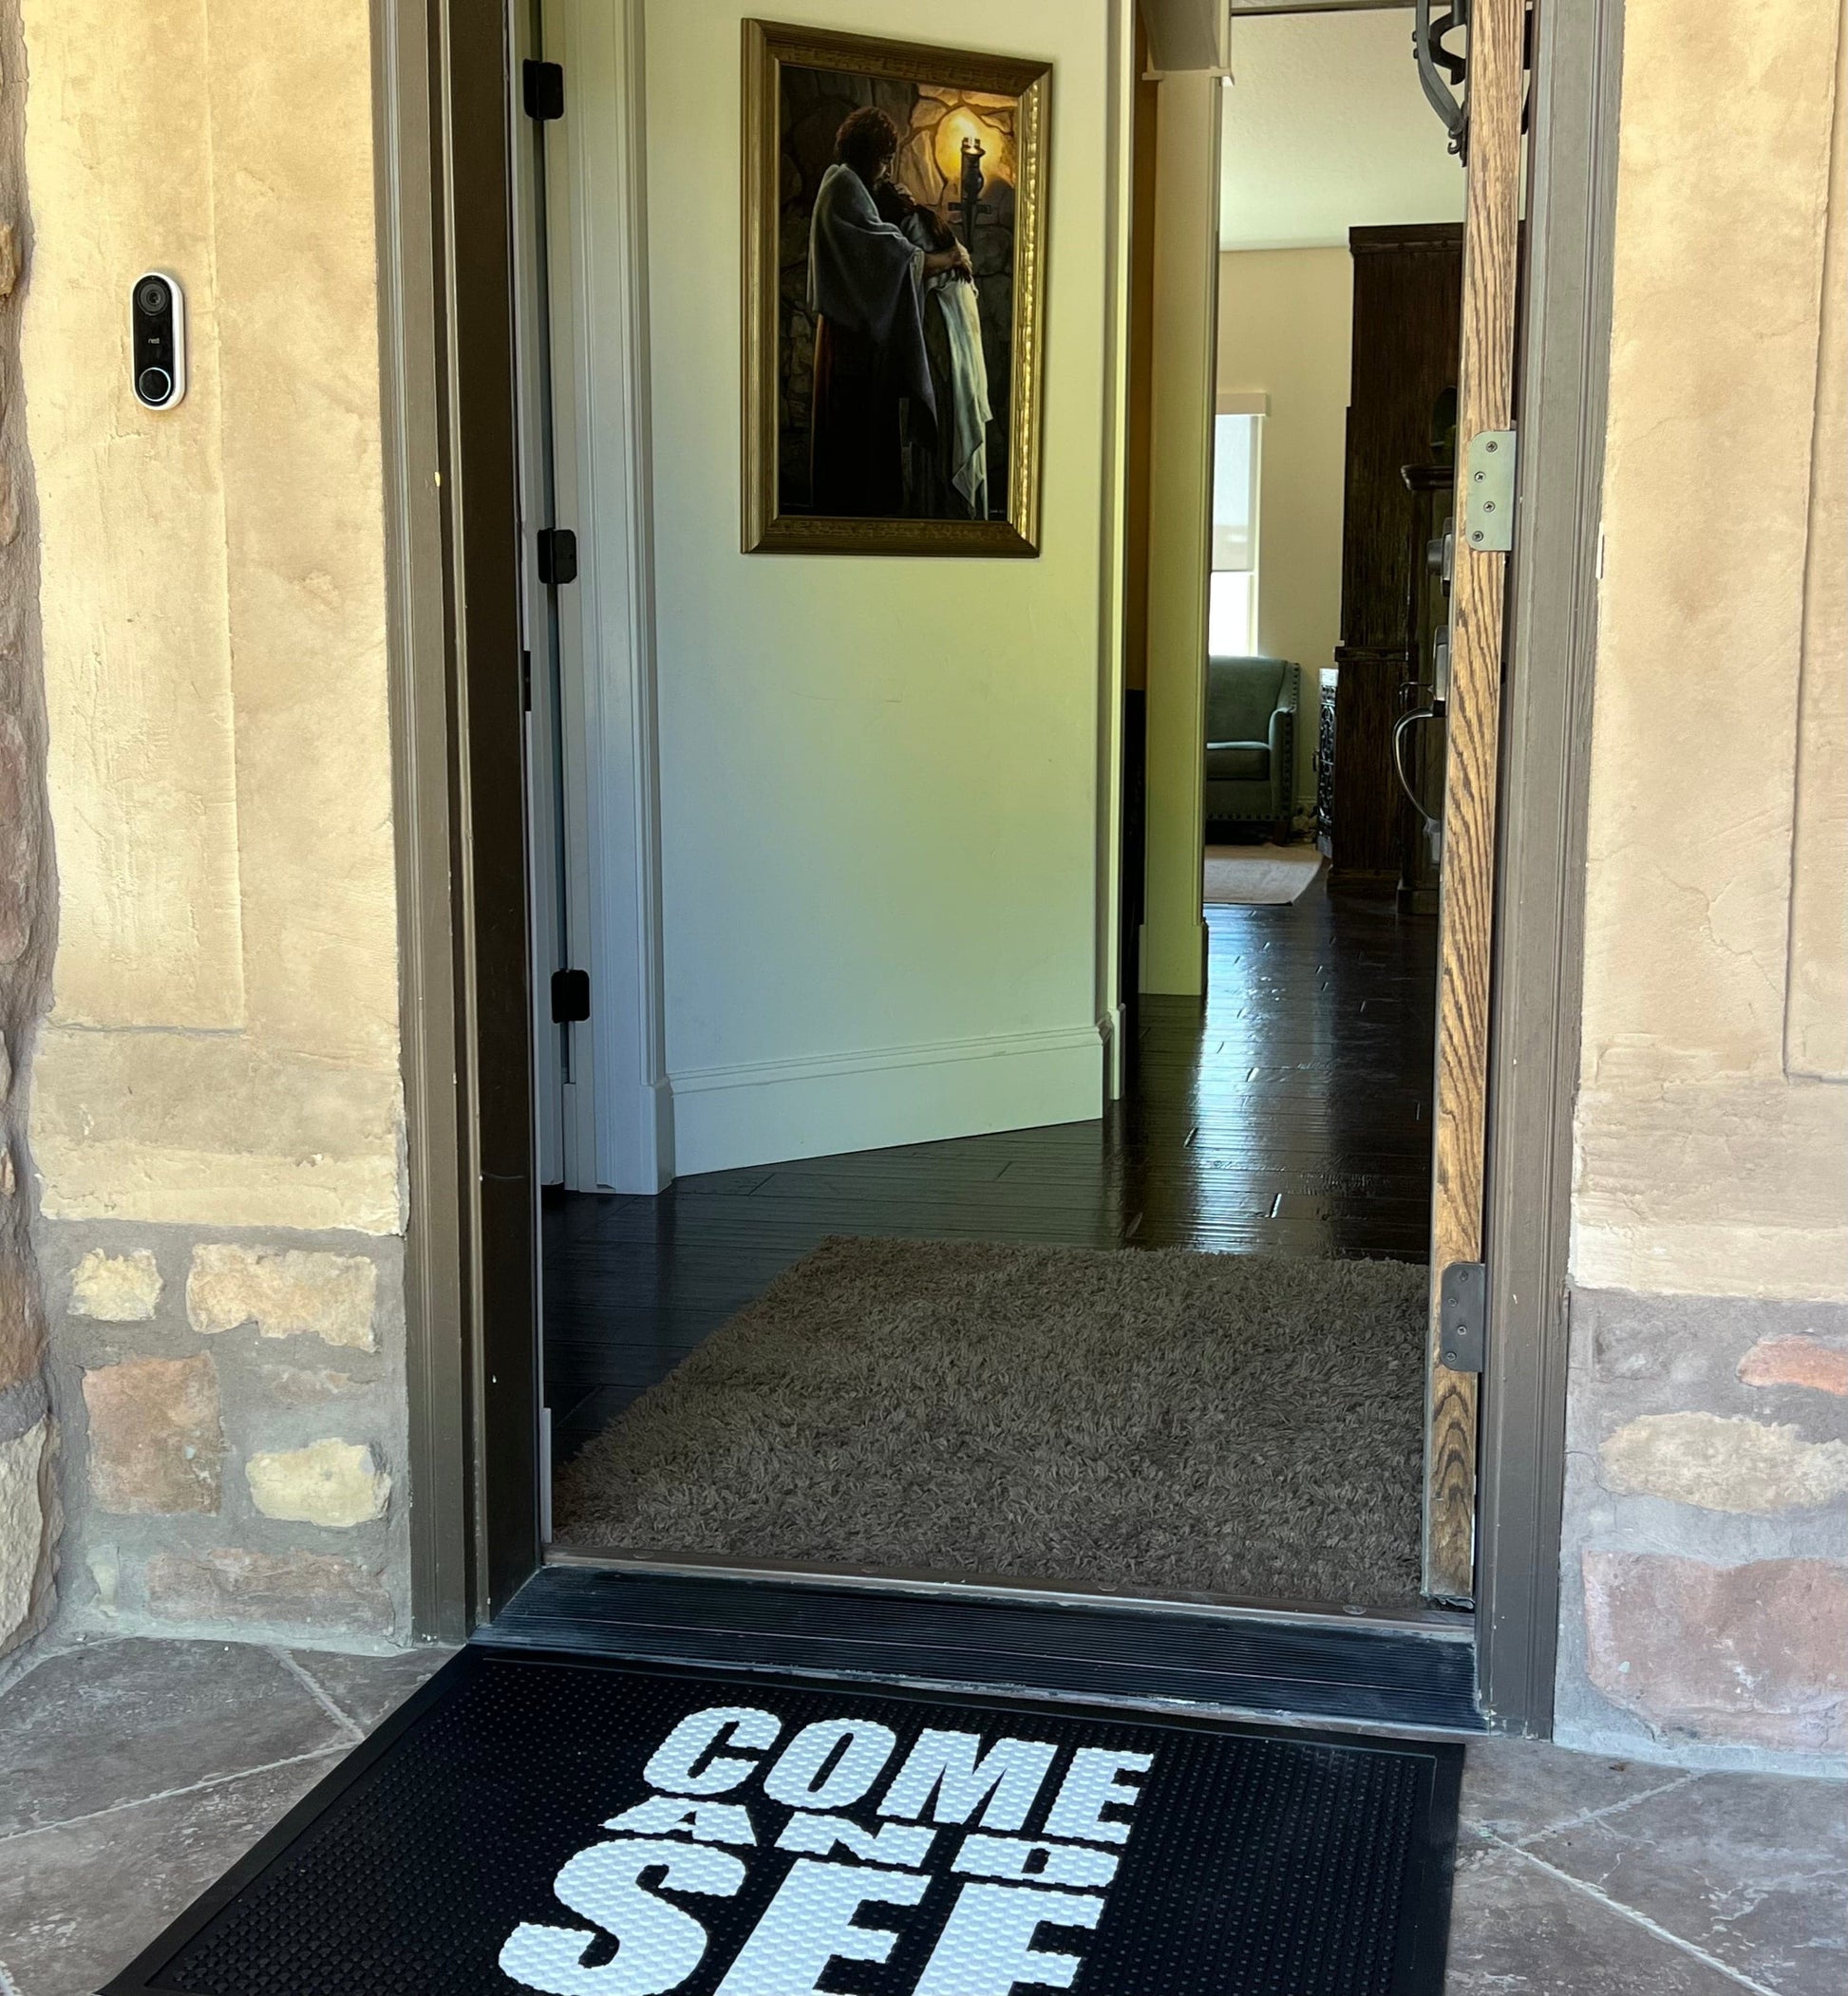 Come and See Door Mat